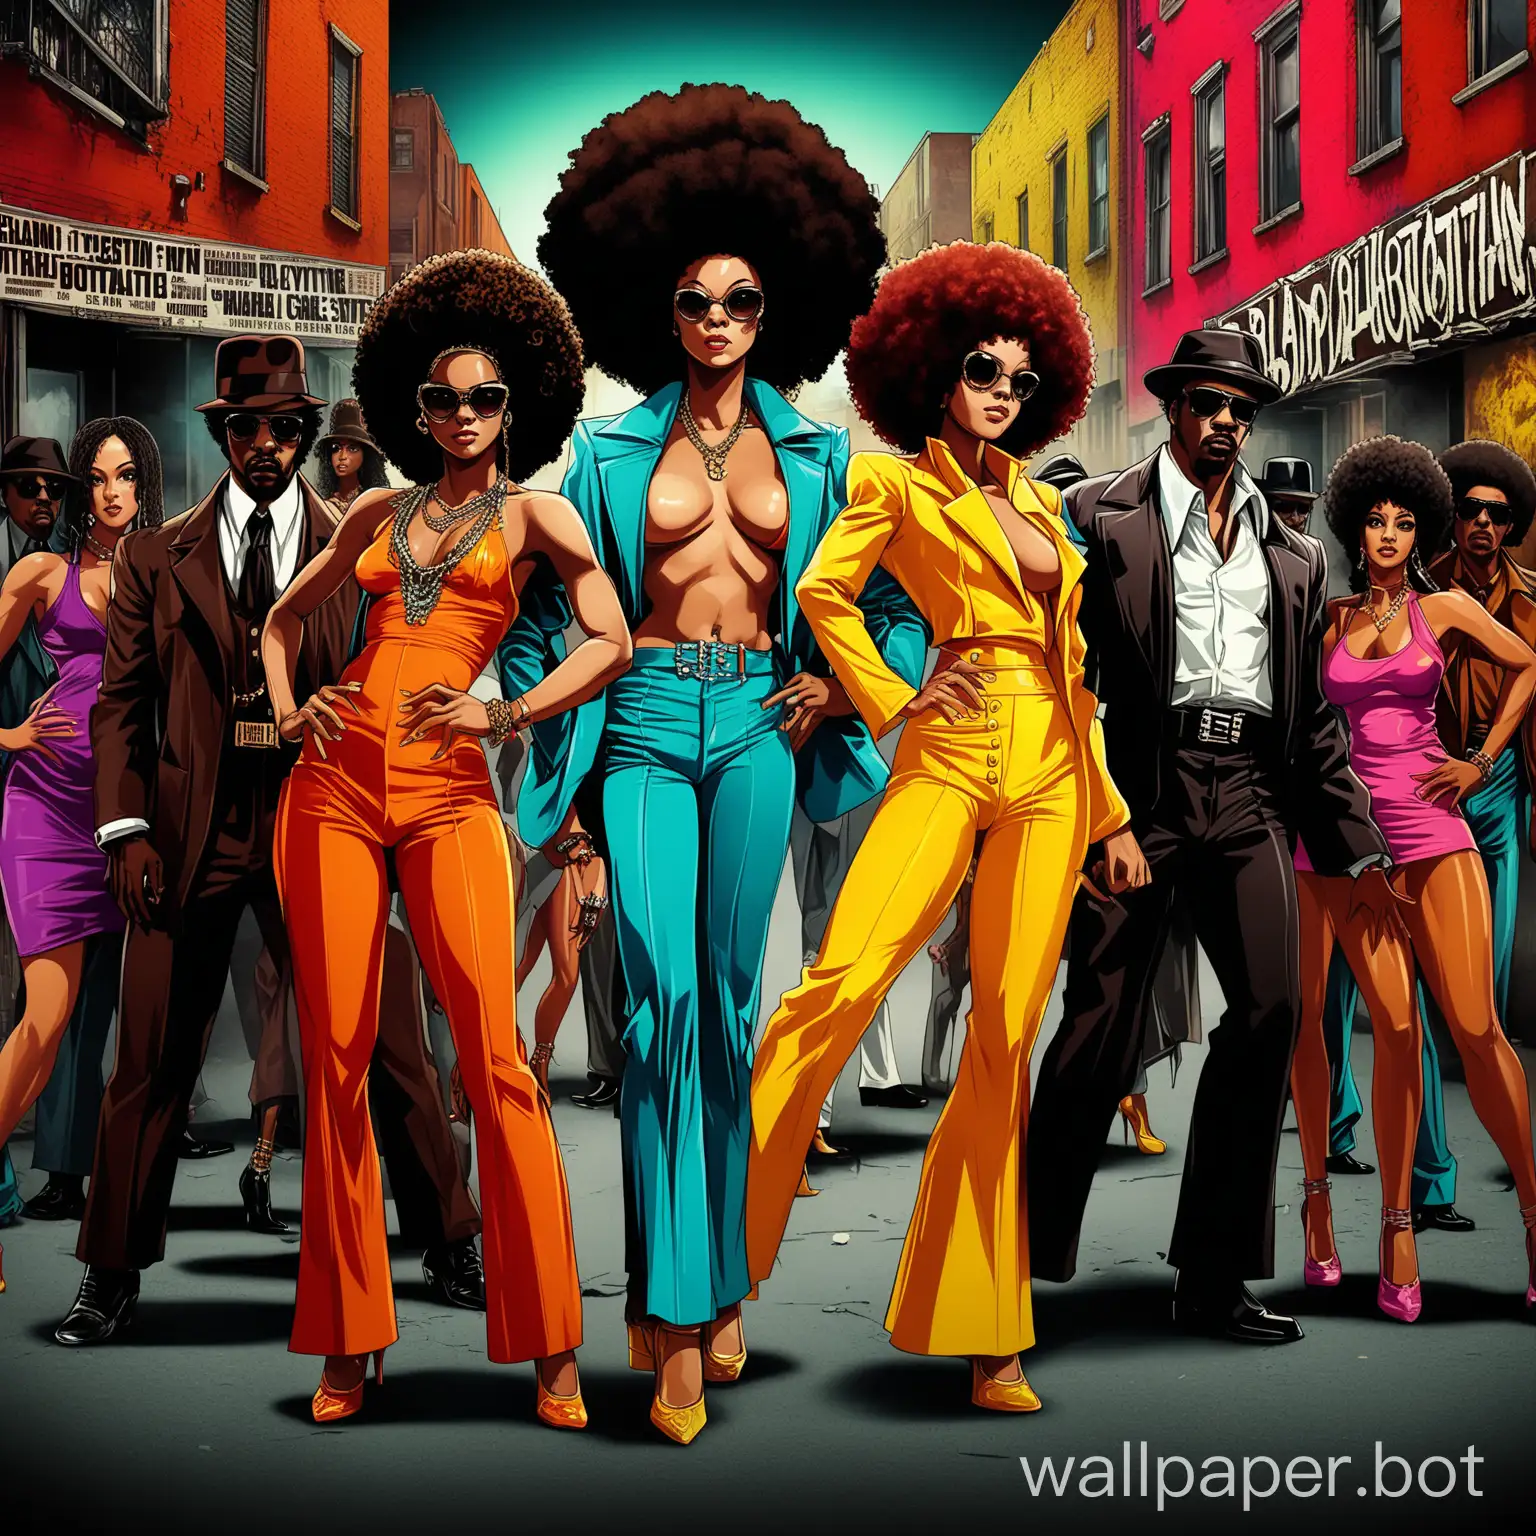 Dynamic-1970s-Blaxploitation-Film-Poster-Singers-Dancers-and-Gangsters-in-Vibrant-AfroCentric-Scene